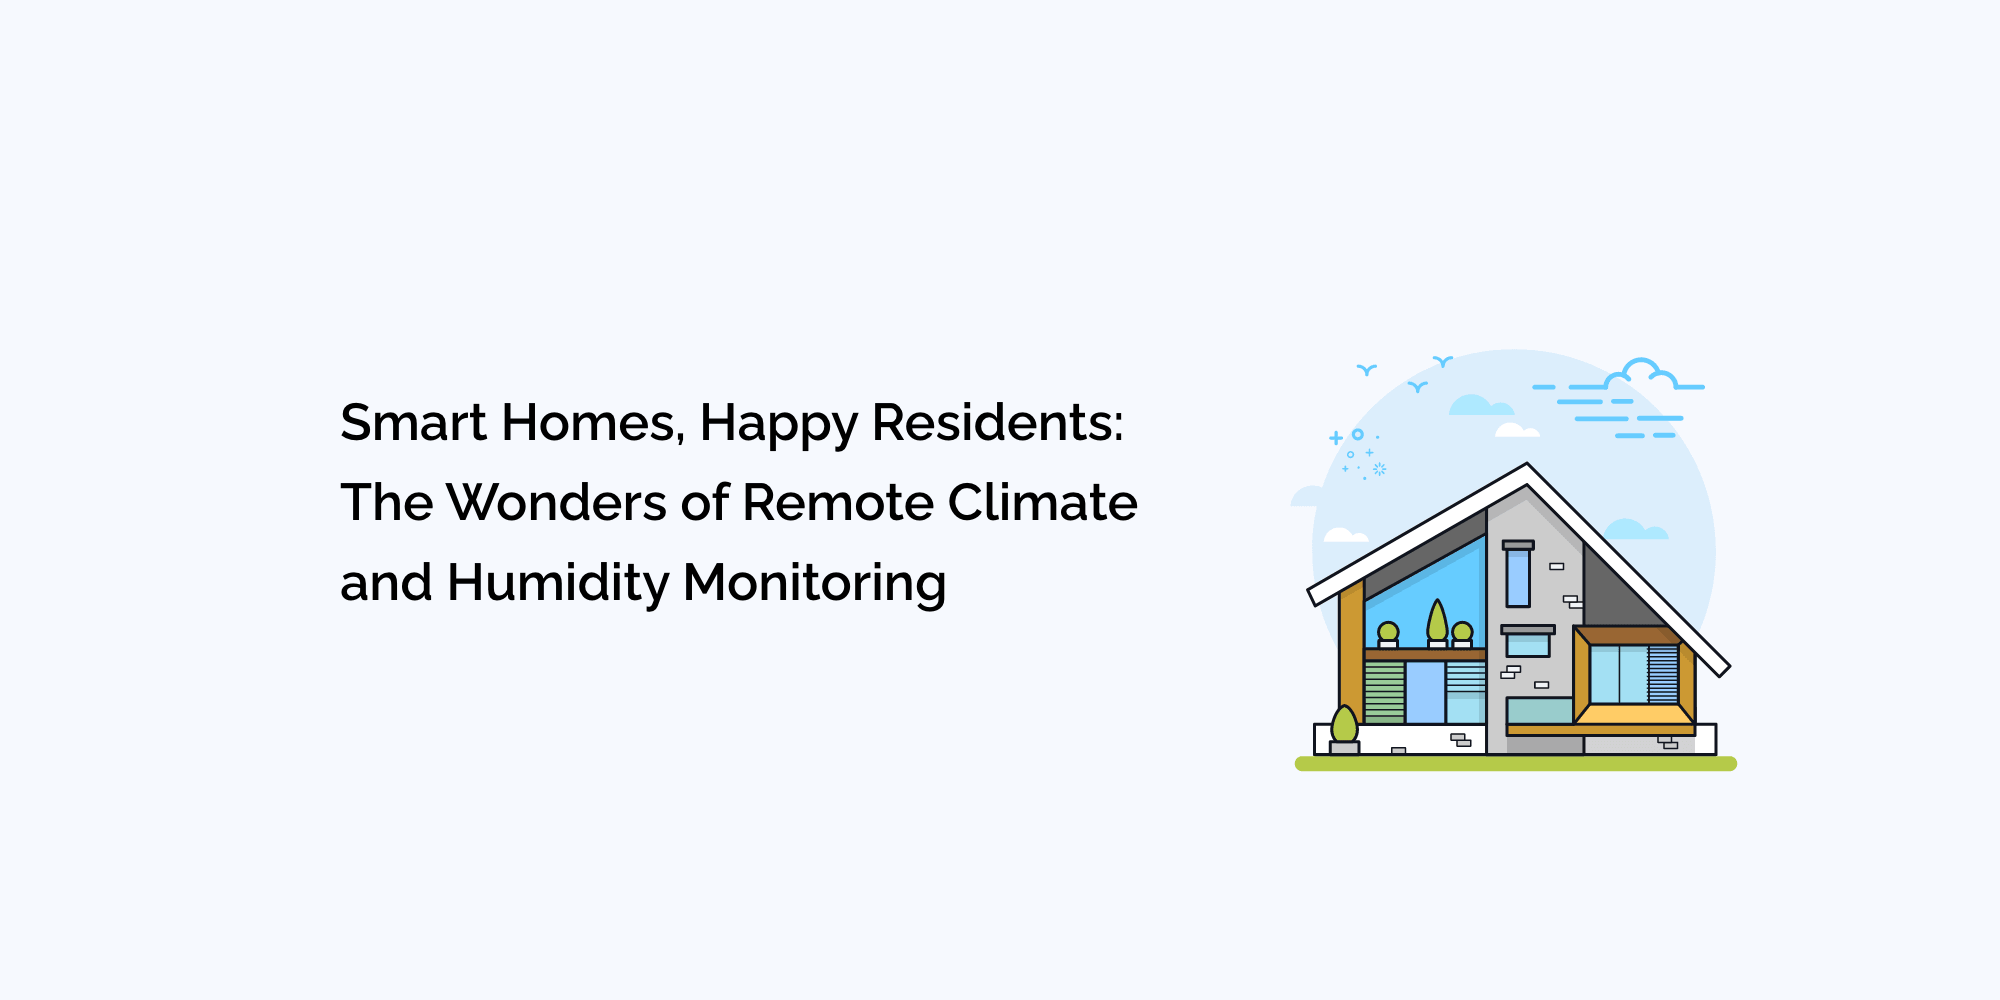 Smart Homes, Happy Residents: The Wonders of Remote Climate and Humidity Monitoring